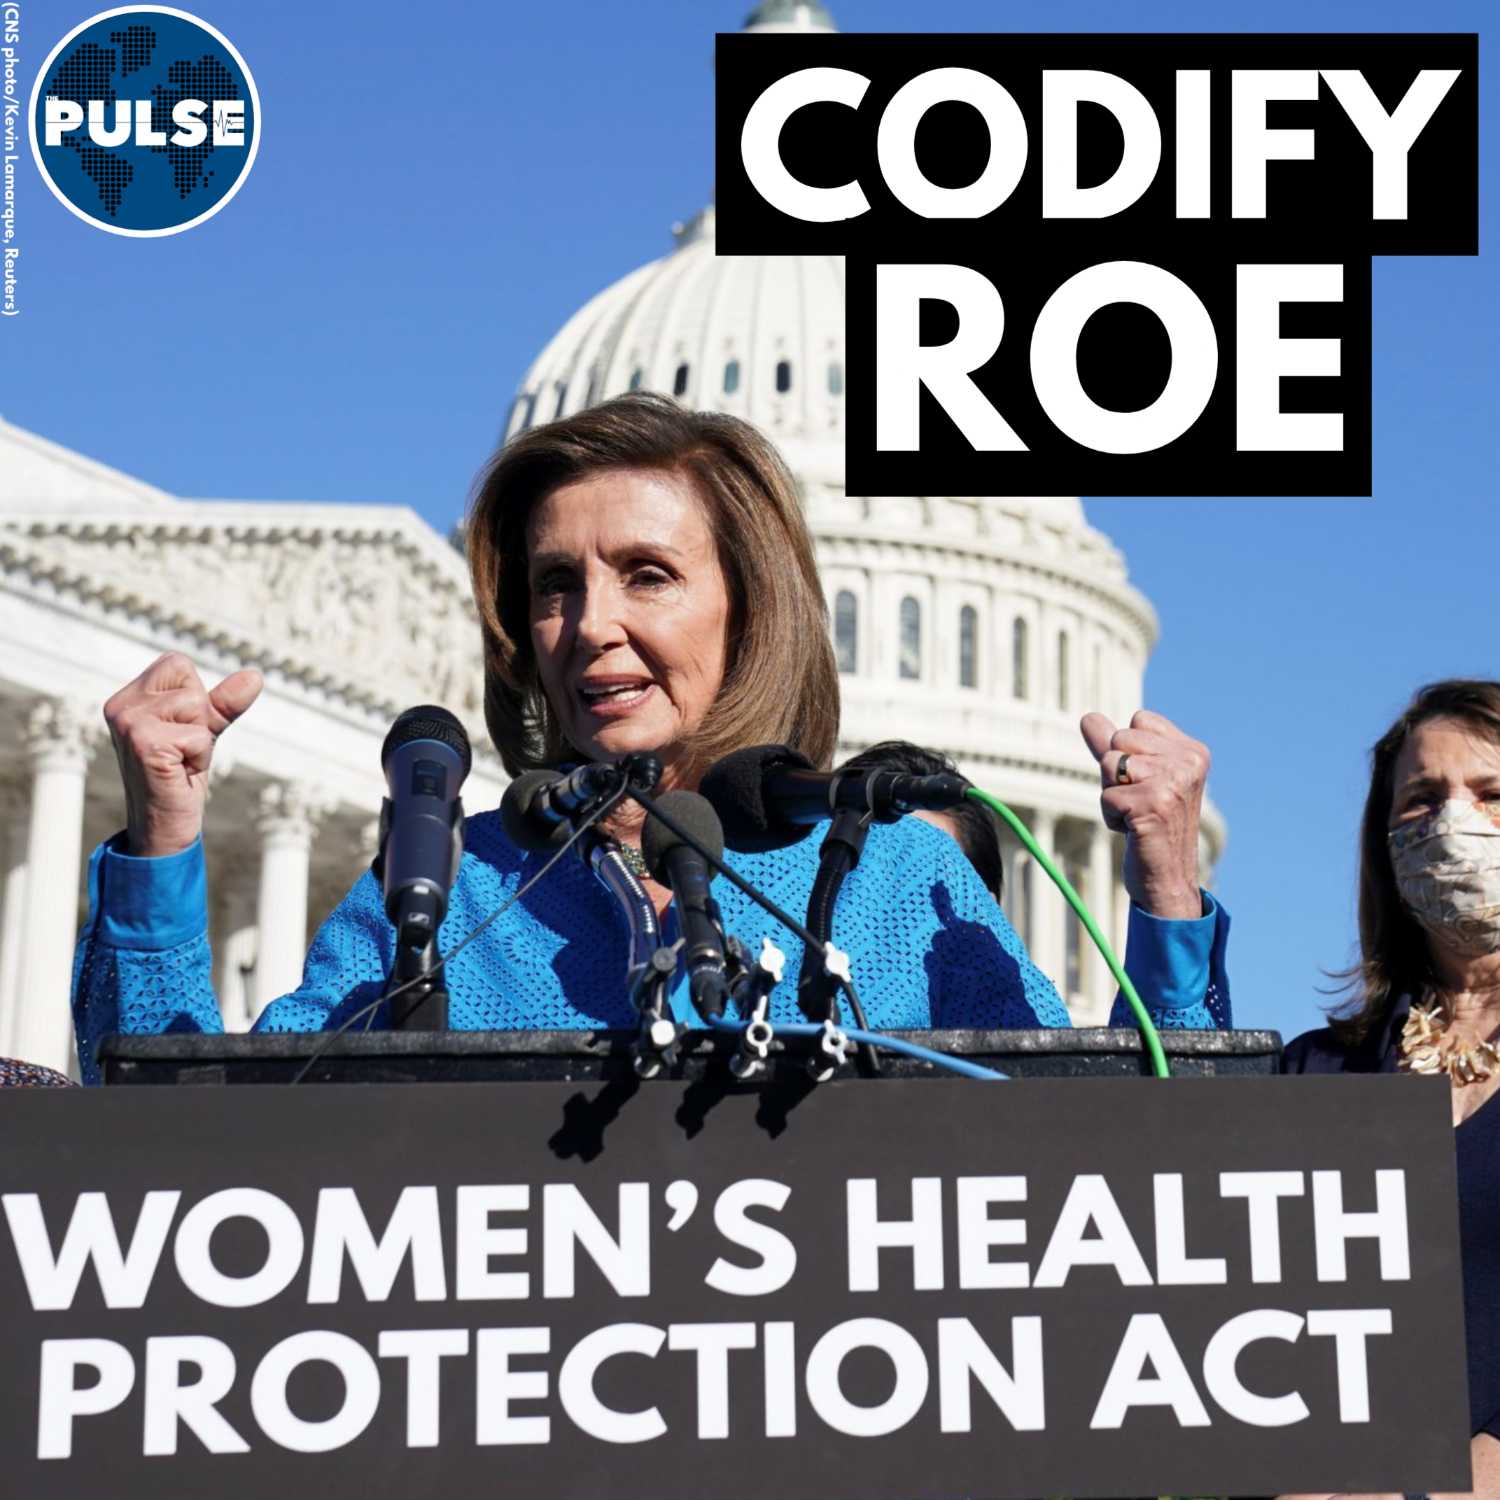 PULSE: US Congress passes a bill to codify Roe into law, and more news items